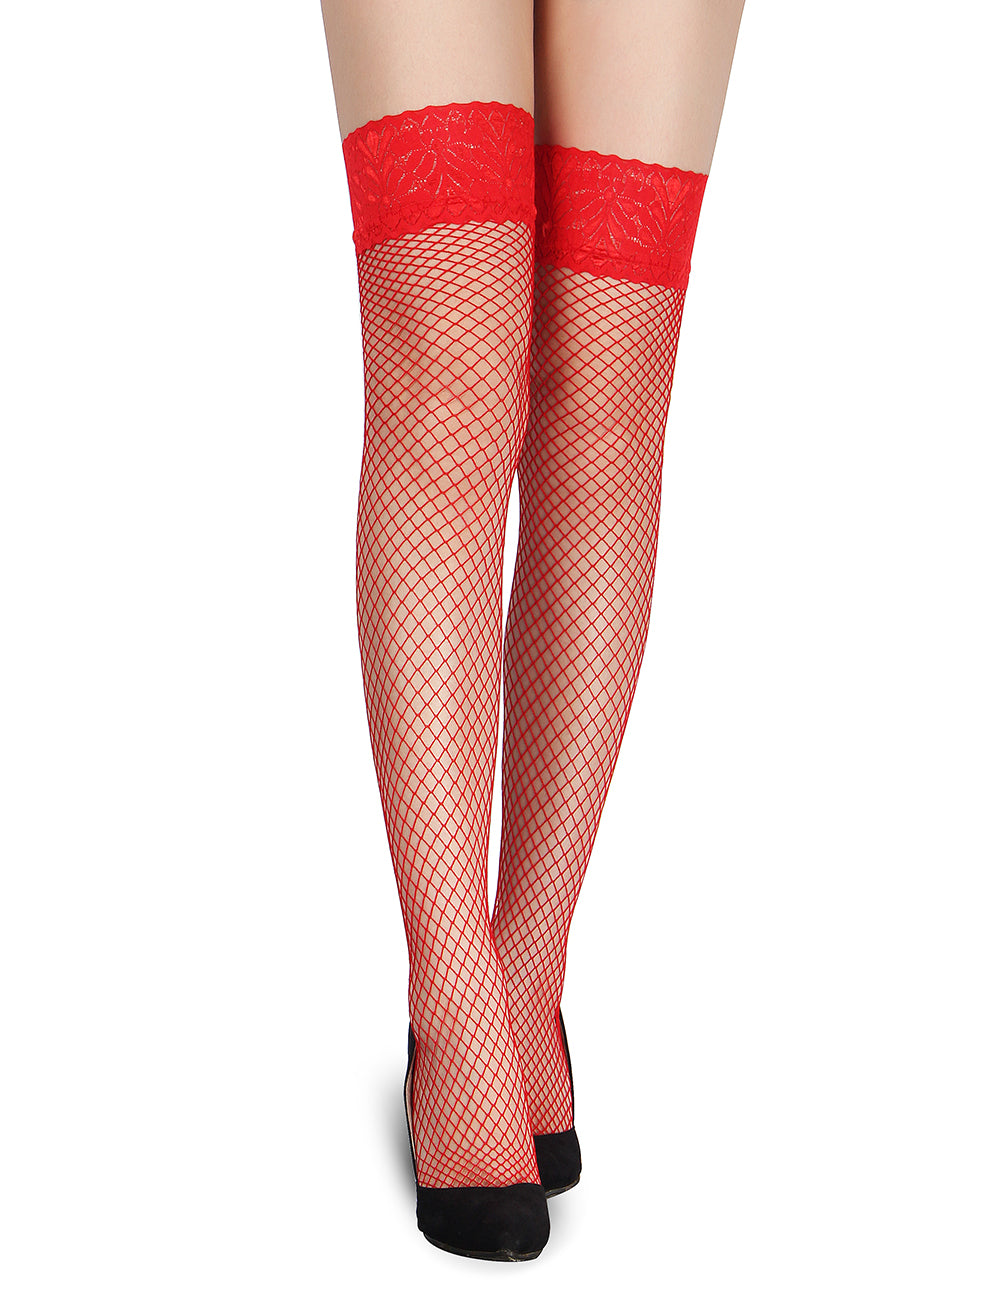 Lady in Red Fishnet Stockings